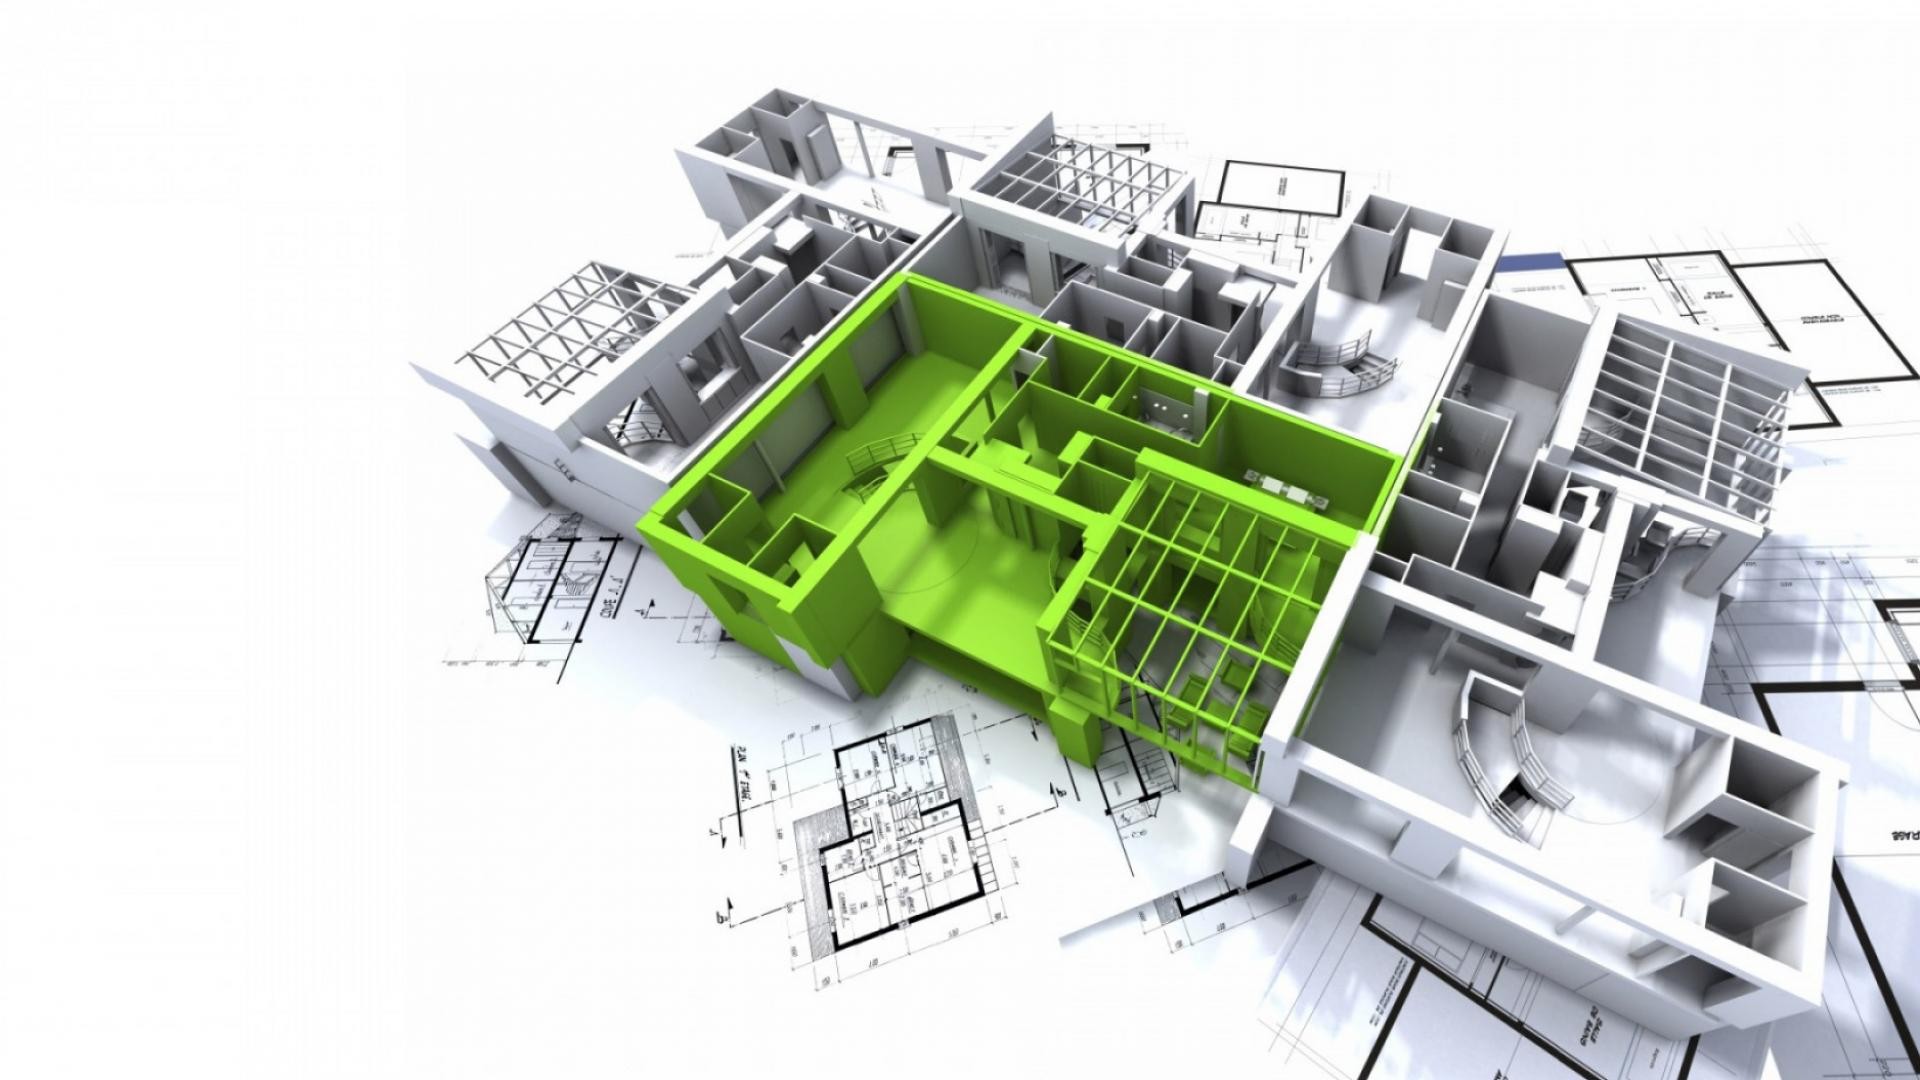 General 1920x1080 house building blueprints interior green CGI architecture simple background white background